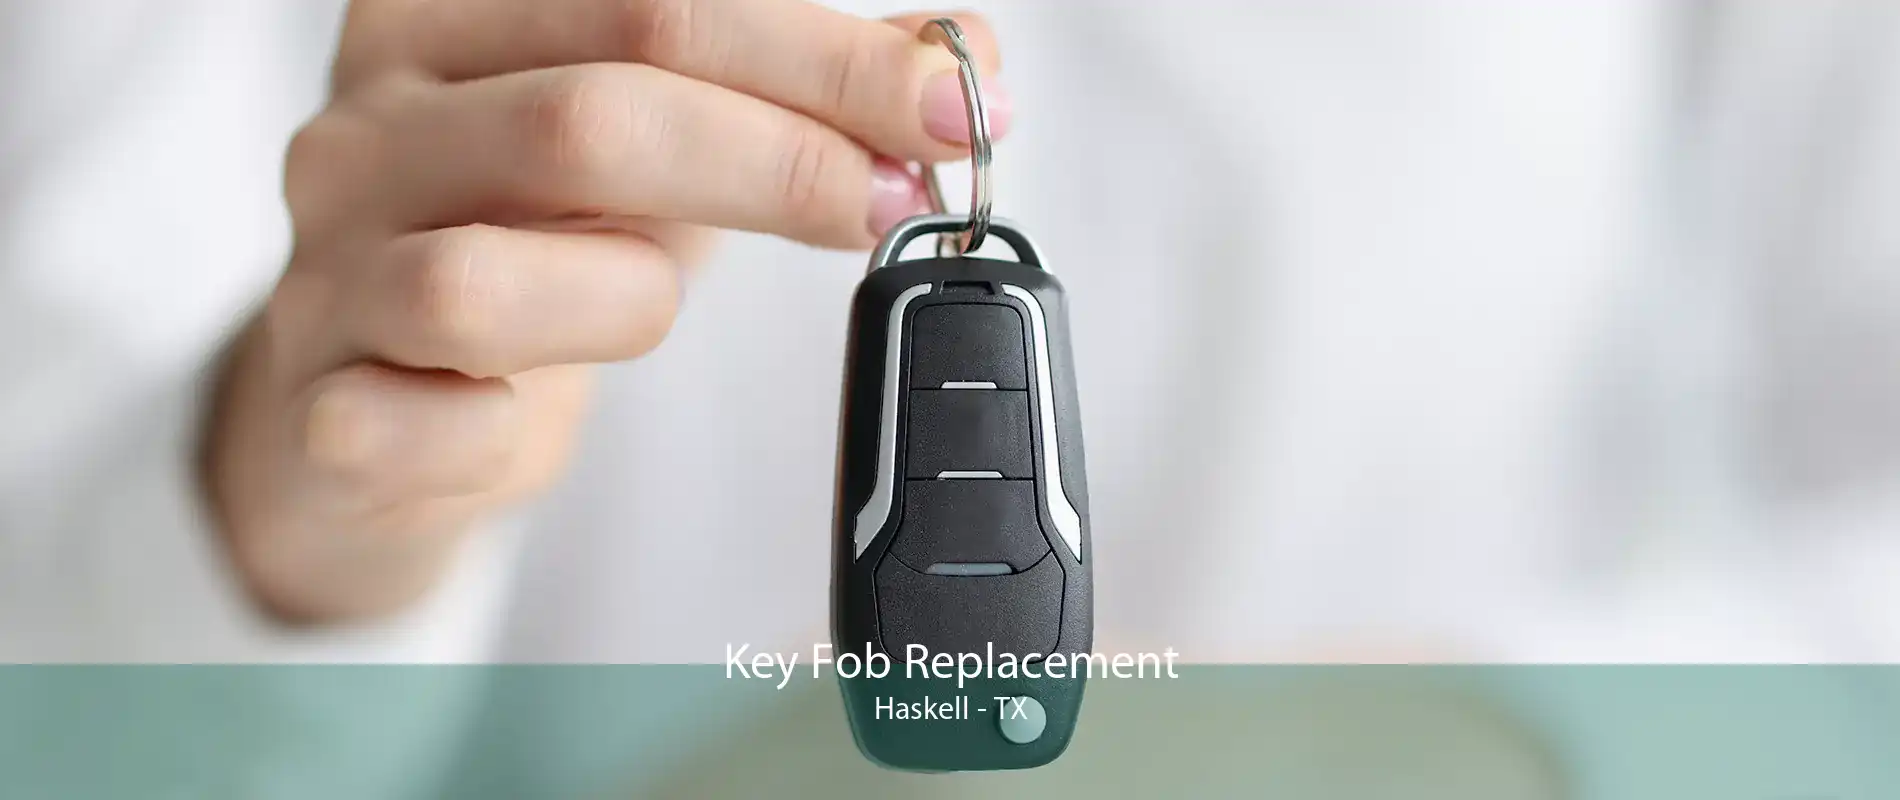 Key Fob Replacement Haskell - TX